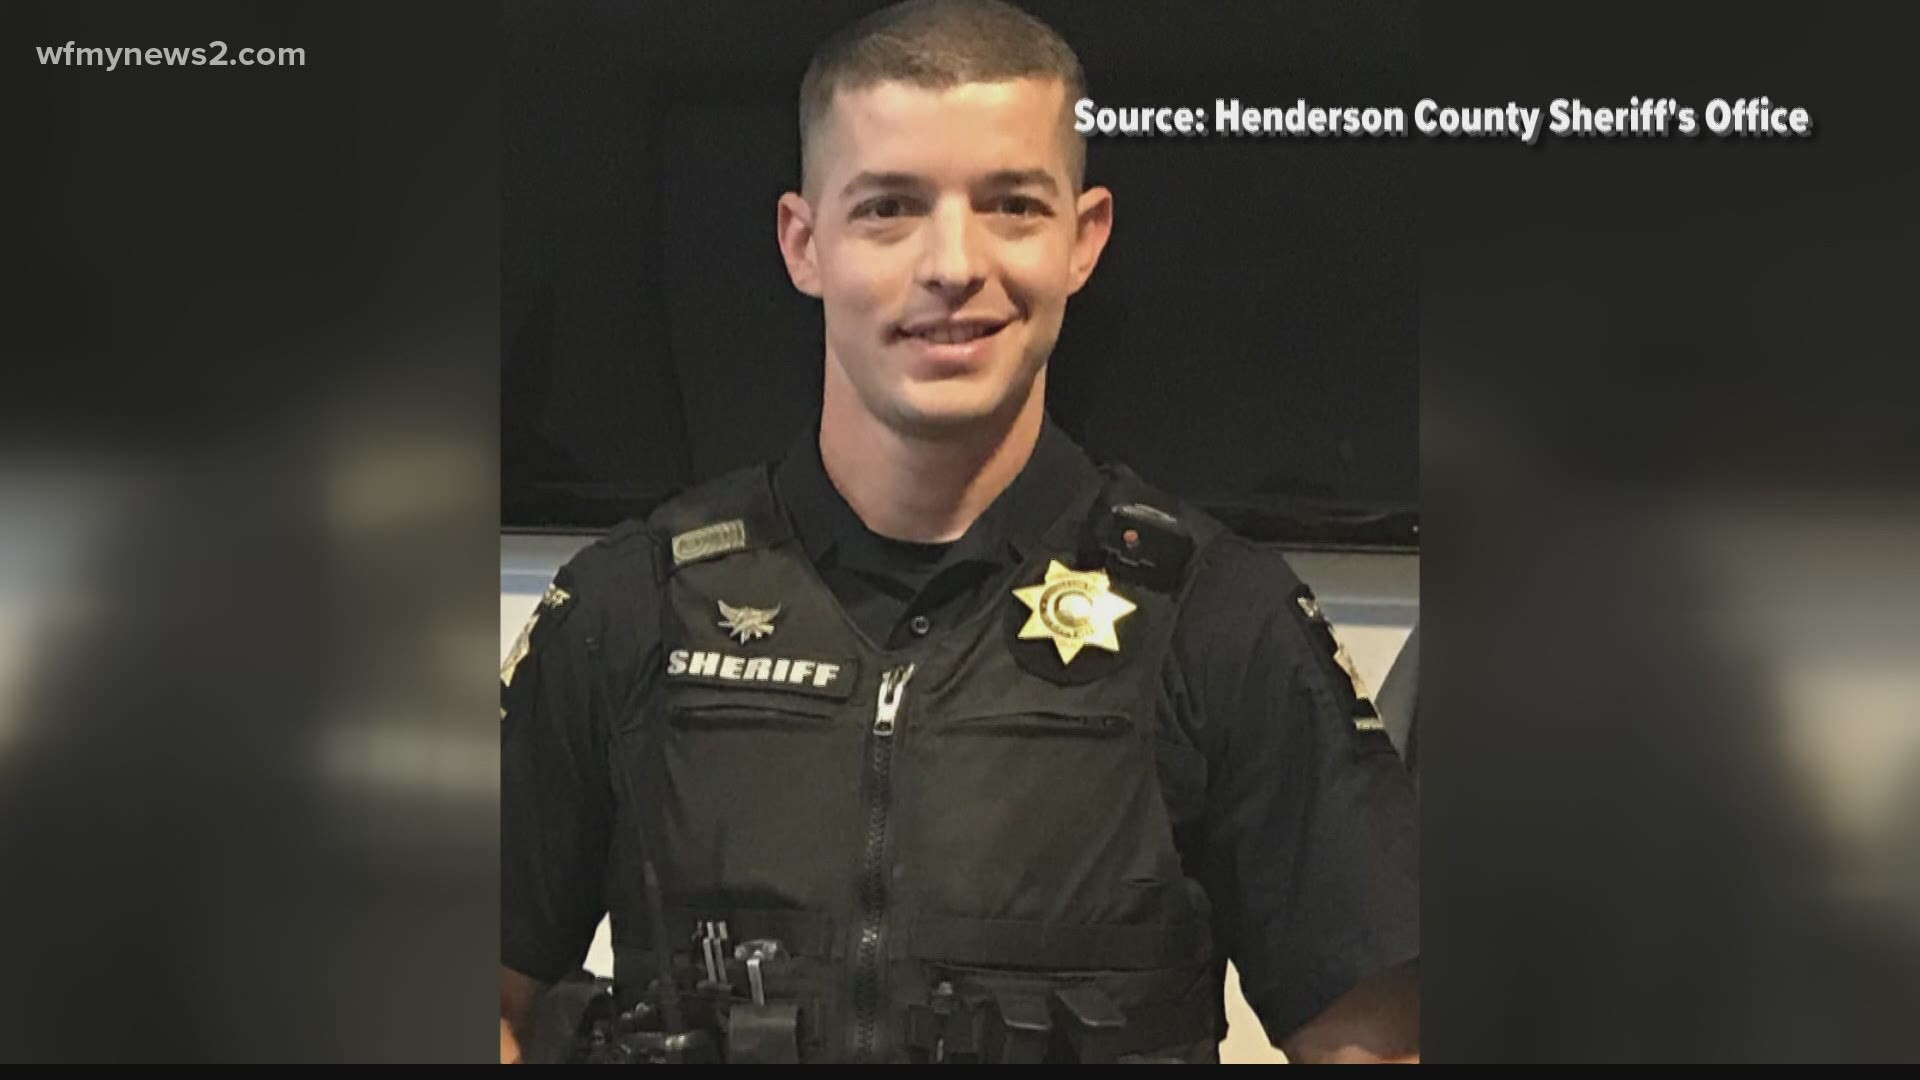 Sheriff Bobby Kimbrough shared what went into heartfelt and difficult motorcade honoring the Henderson County deputy that was shot and killed on duty.